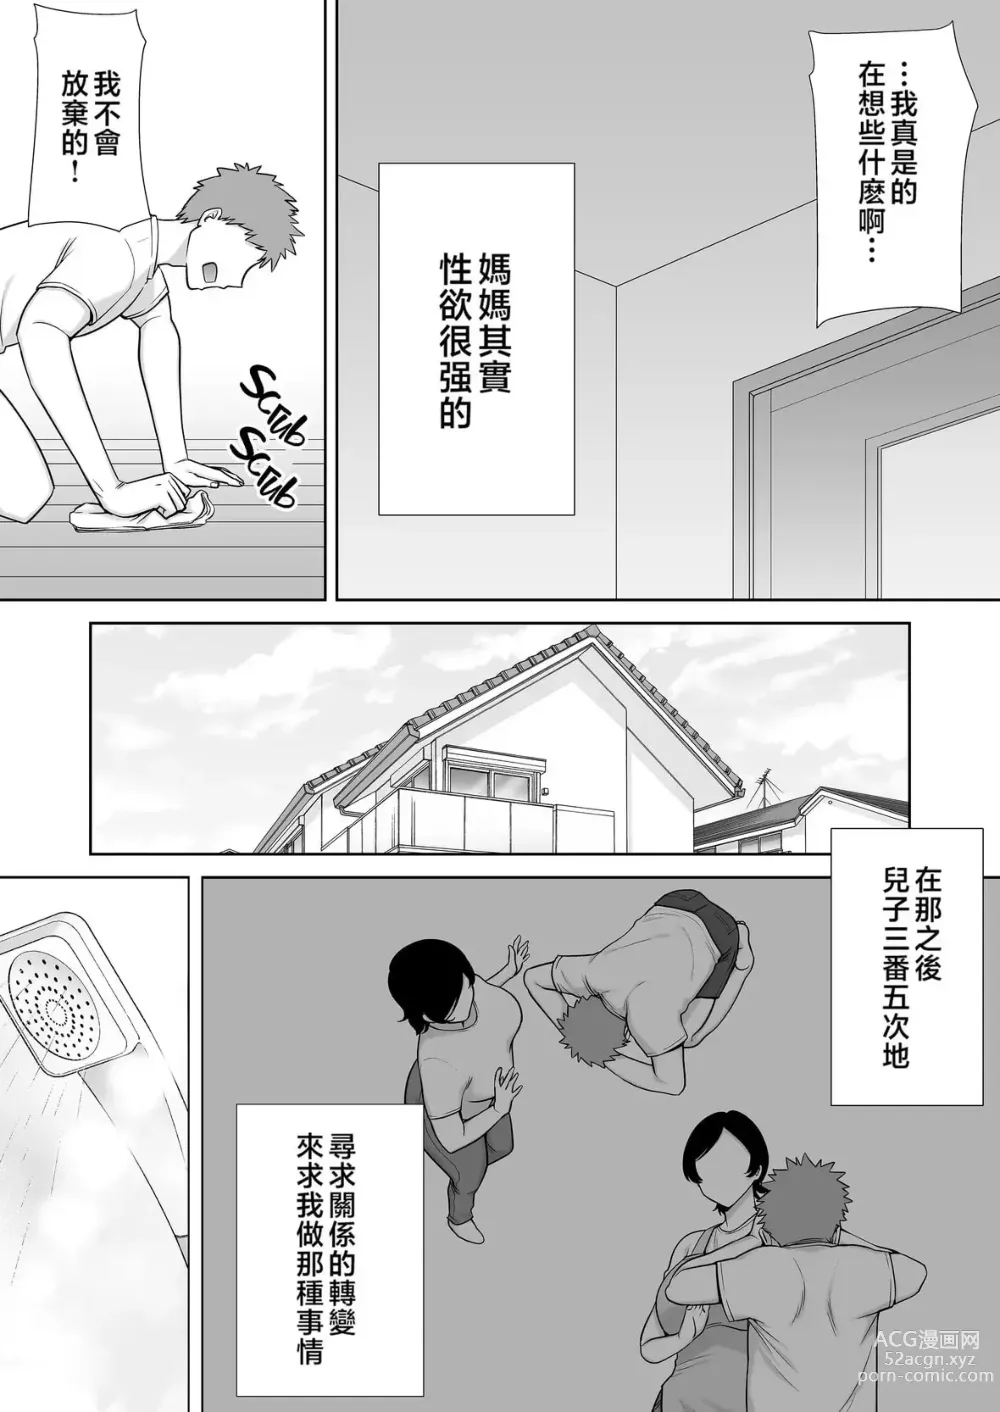 Page 8 of doujinshi even mom want a litle lovin